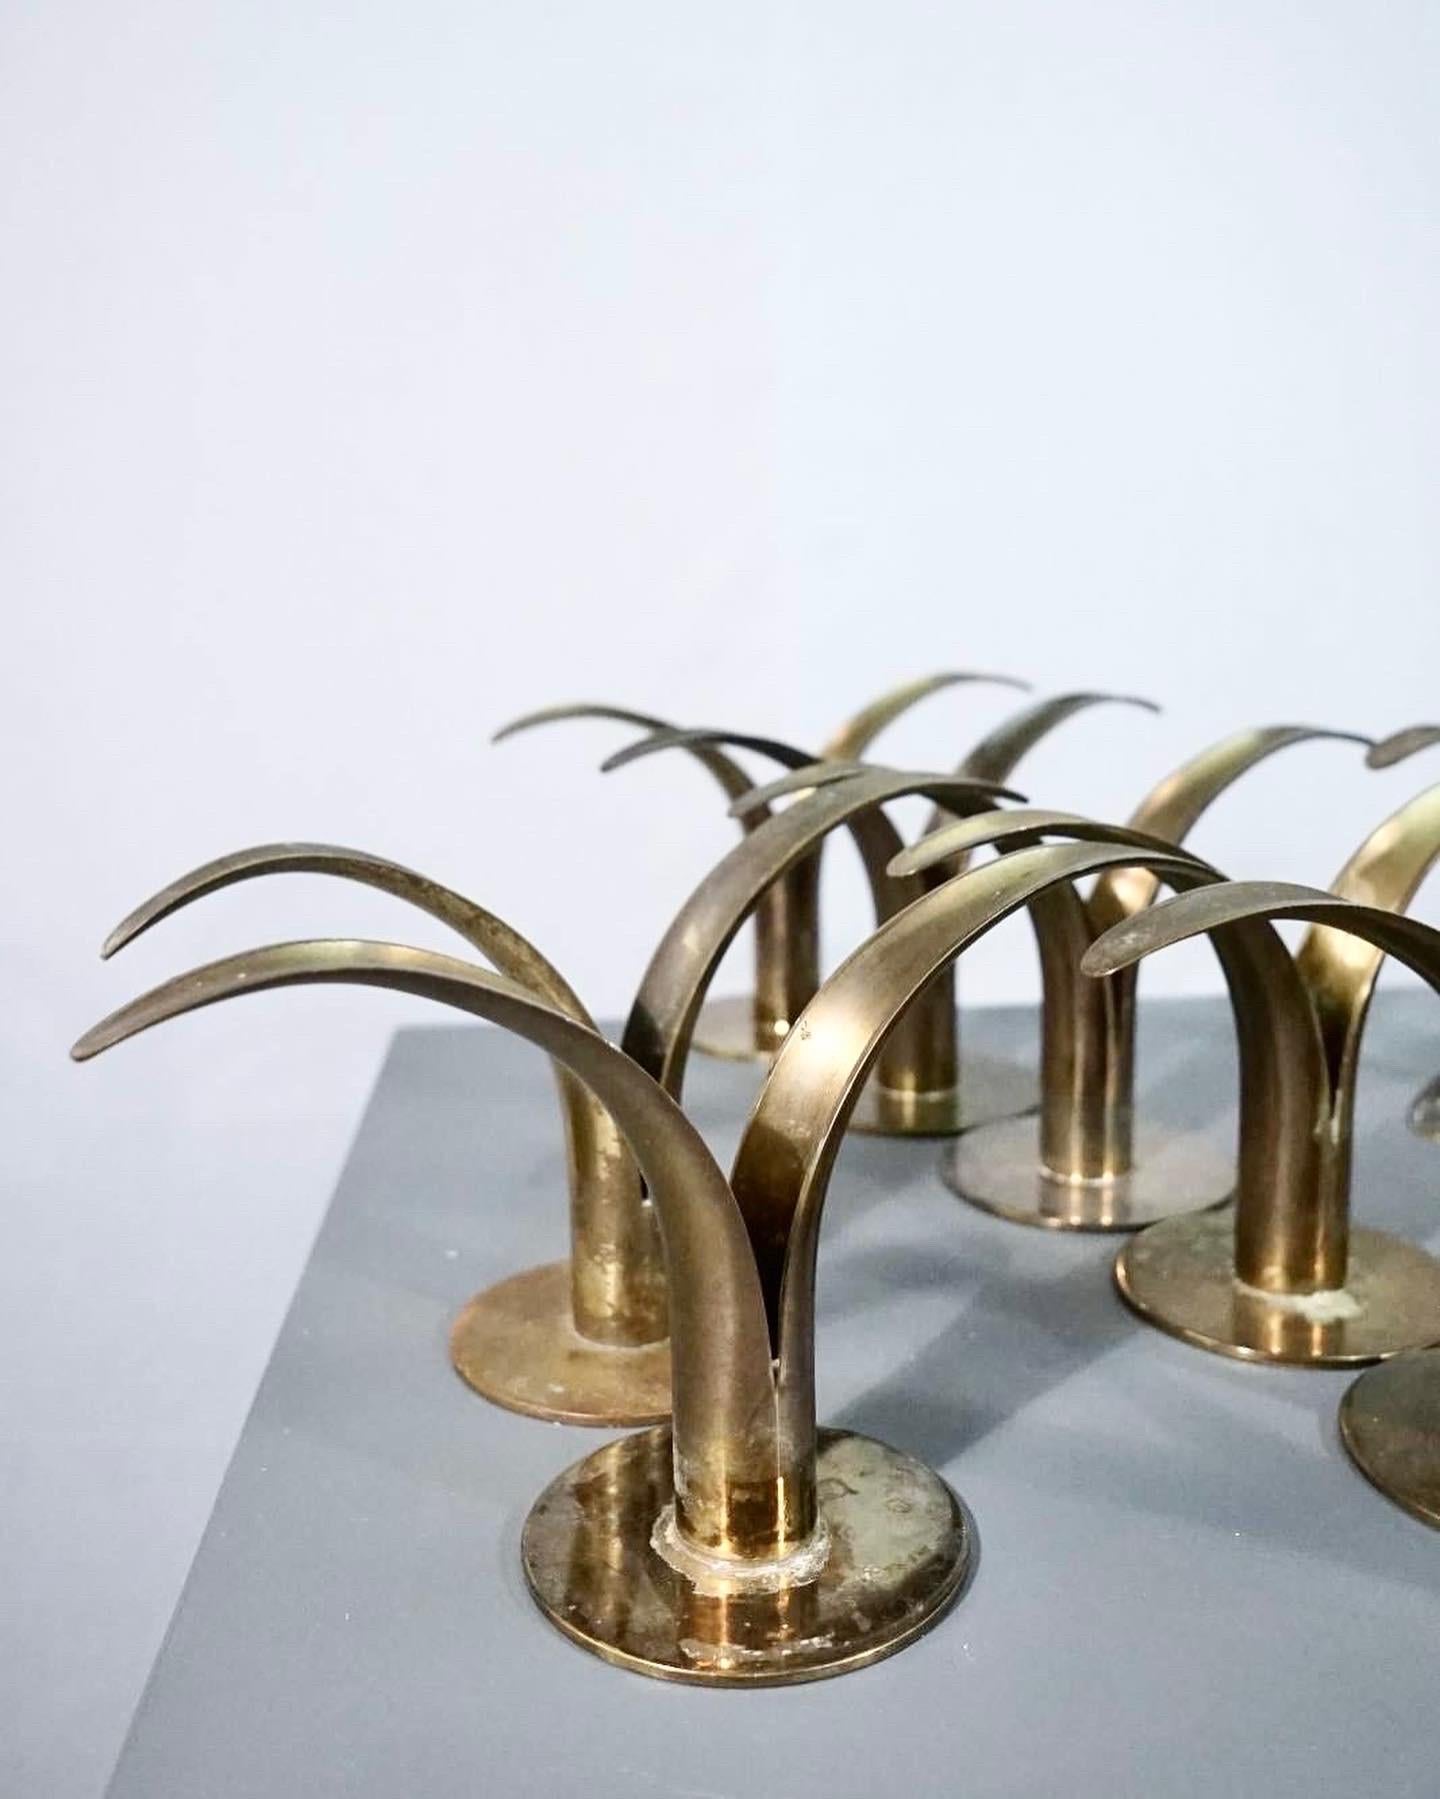 Set of 10 lily candle holders designed by Ivar Ålenius Björk for Ystad Metal In Good Condition For Sale In Valby, 84